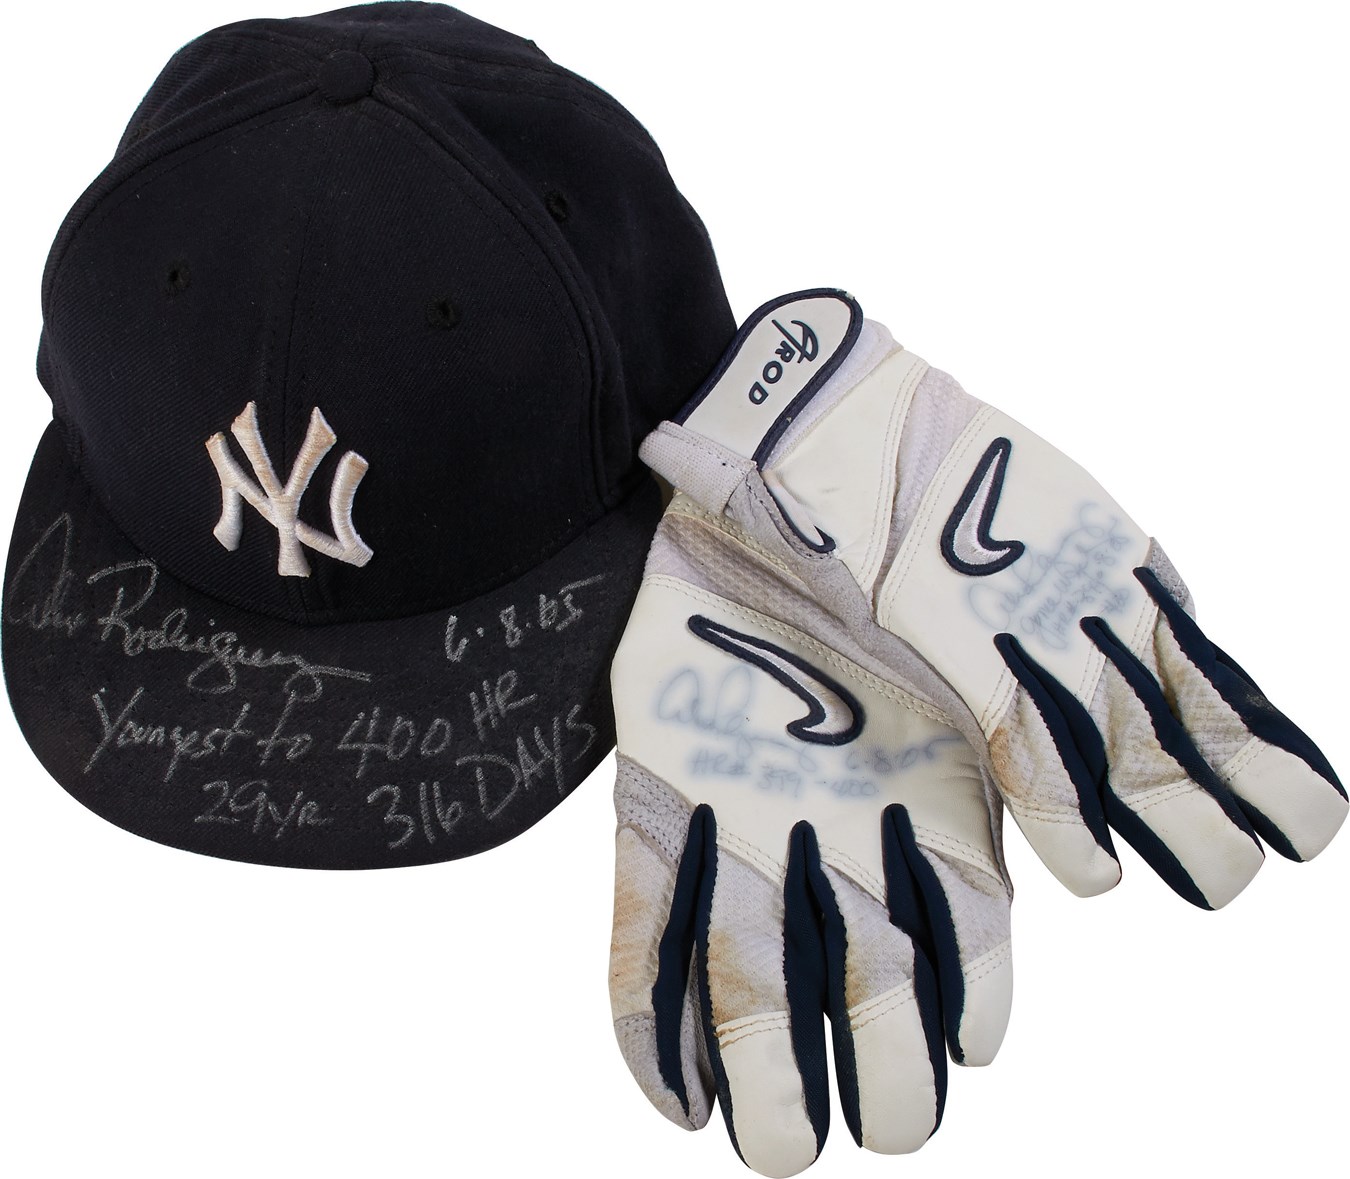 - 2005 Alex Rodriguez HR #400 Signed Game Worn Cap & Batting Gloves - Youngest Player Ever (Photomatched & A-Rod LOA)